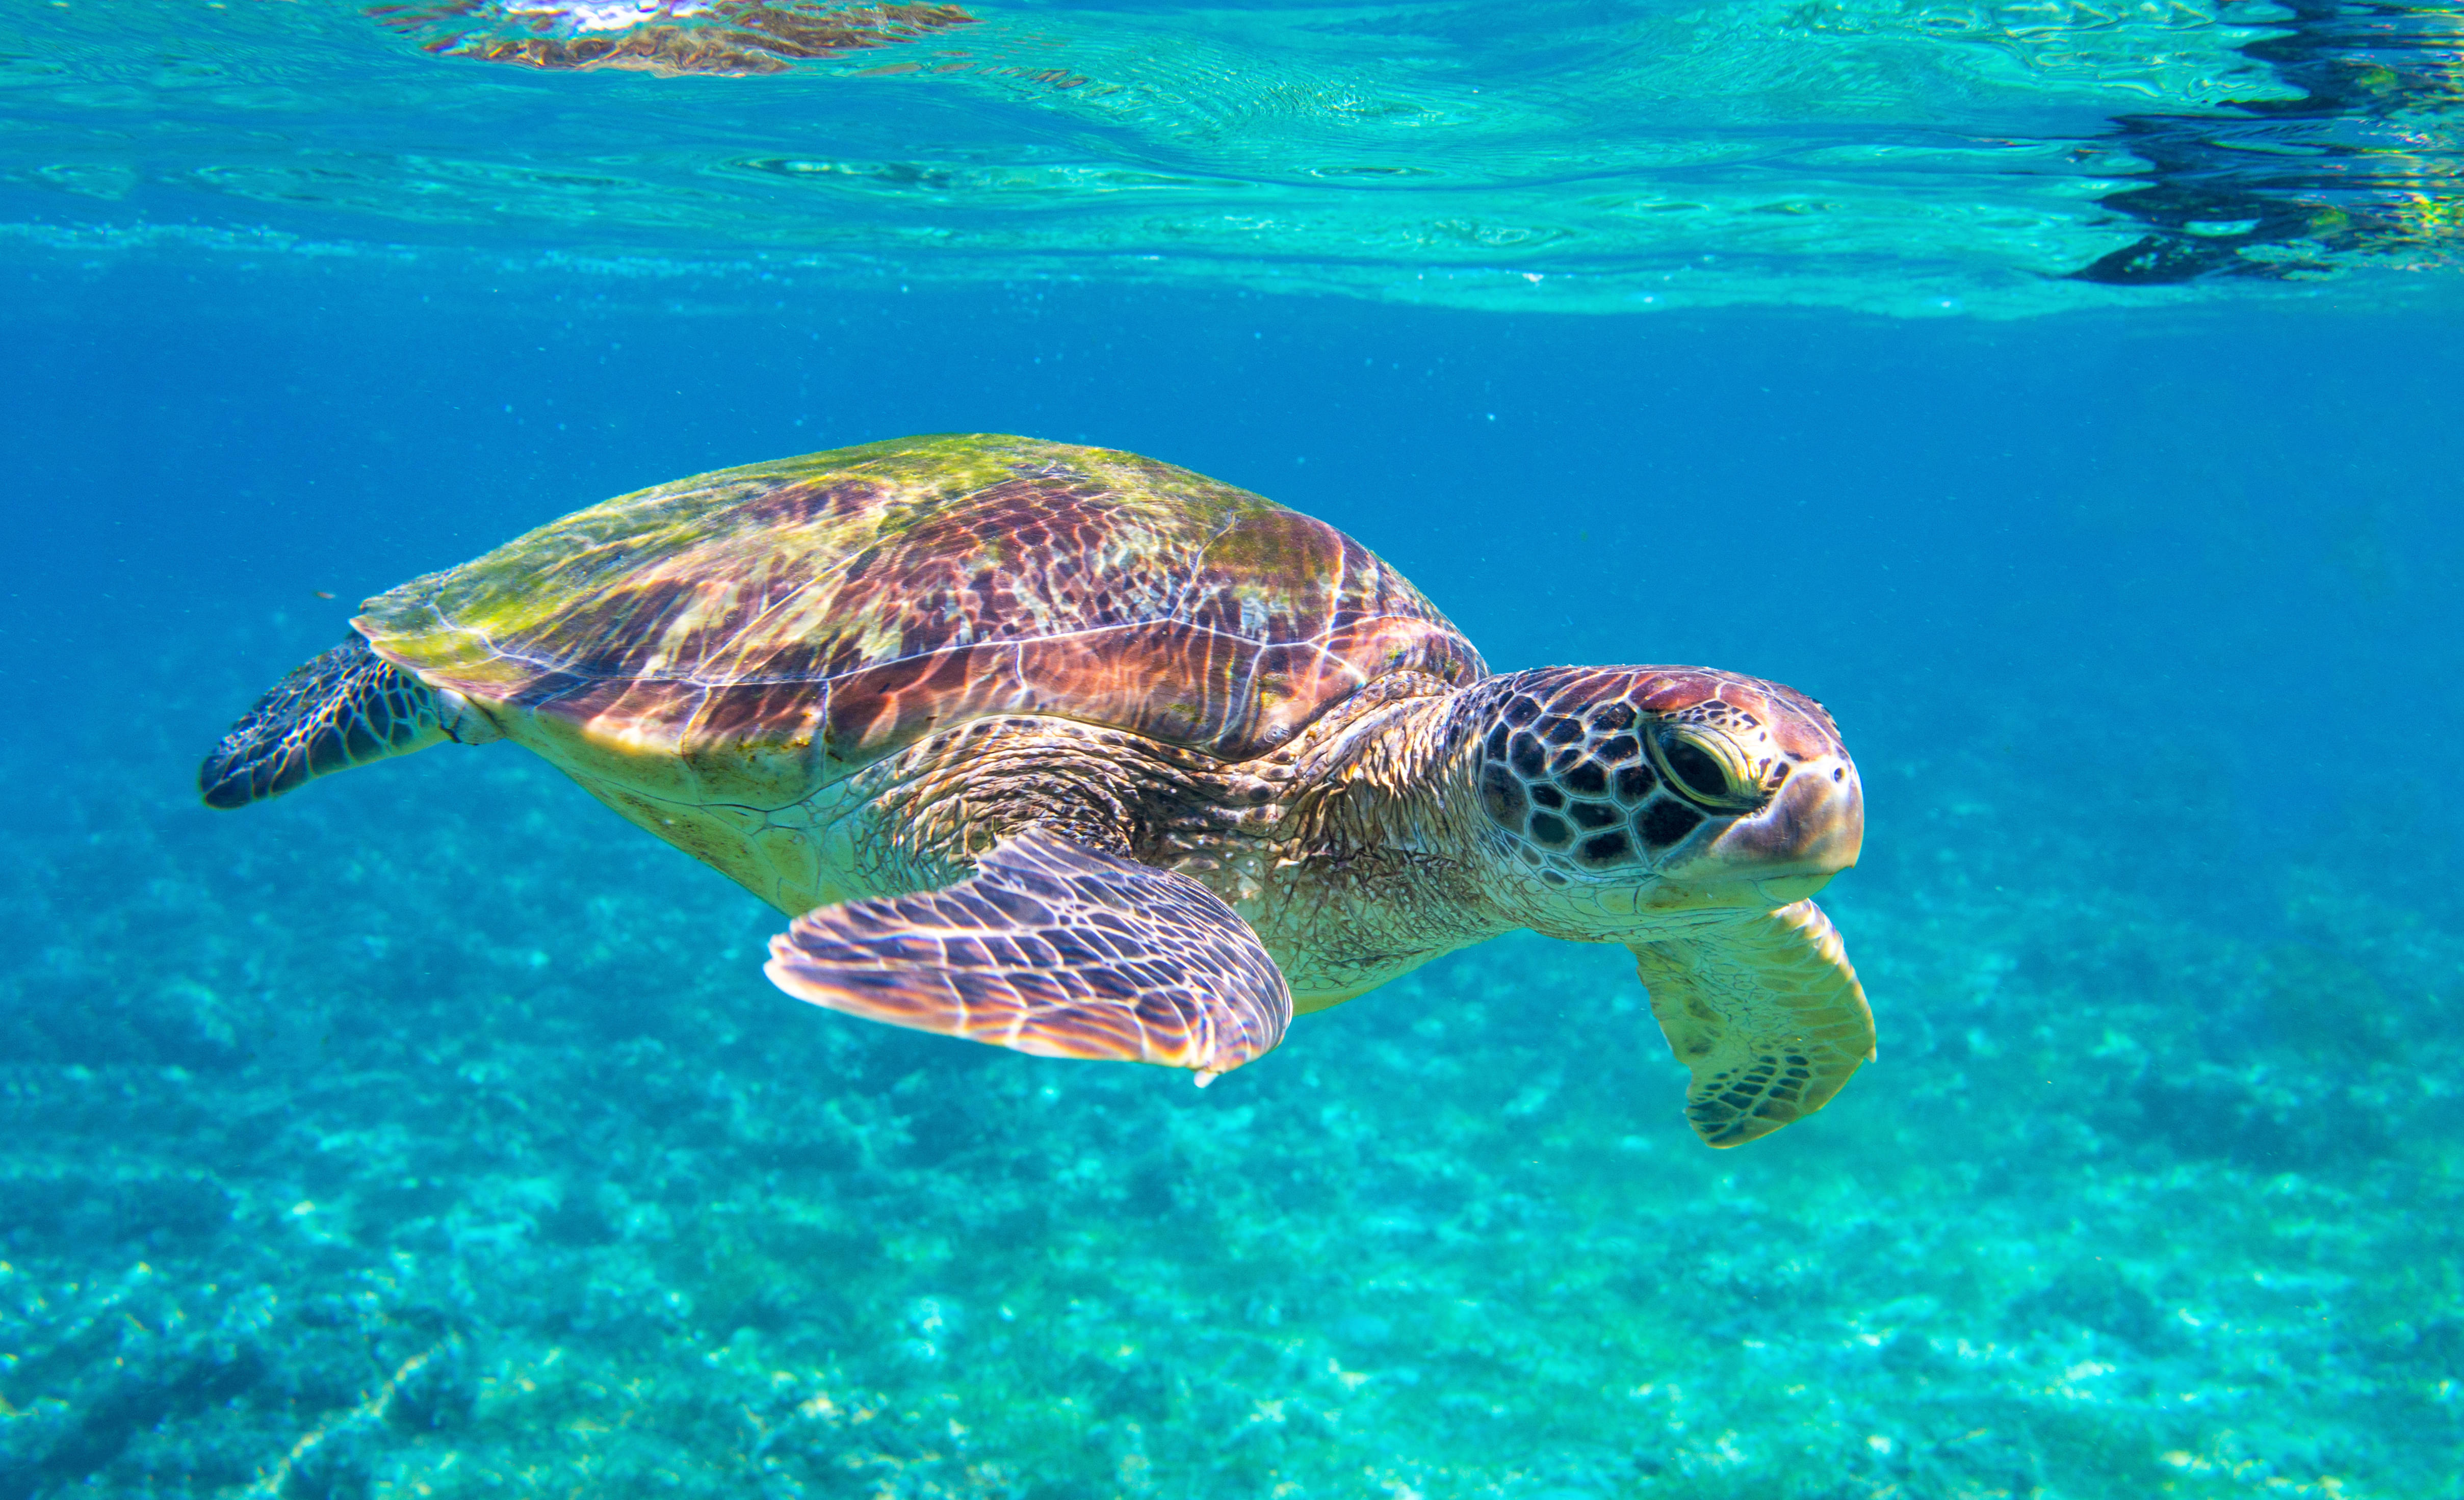 Visit the turtles that live in the water 